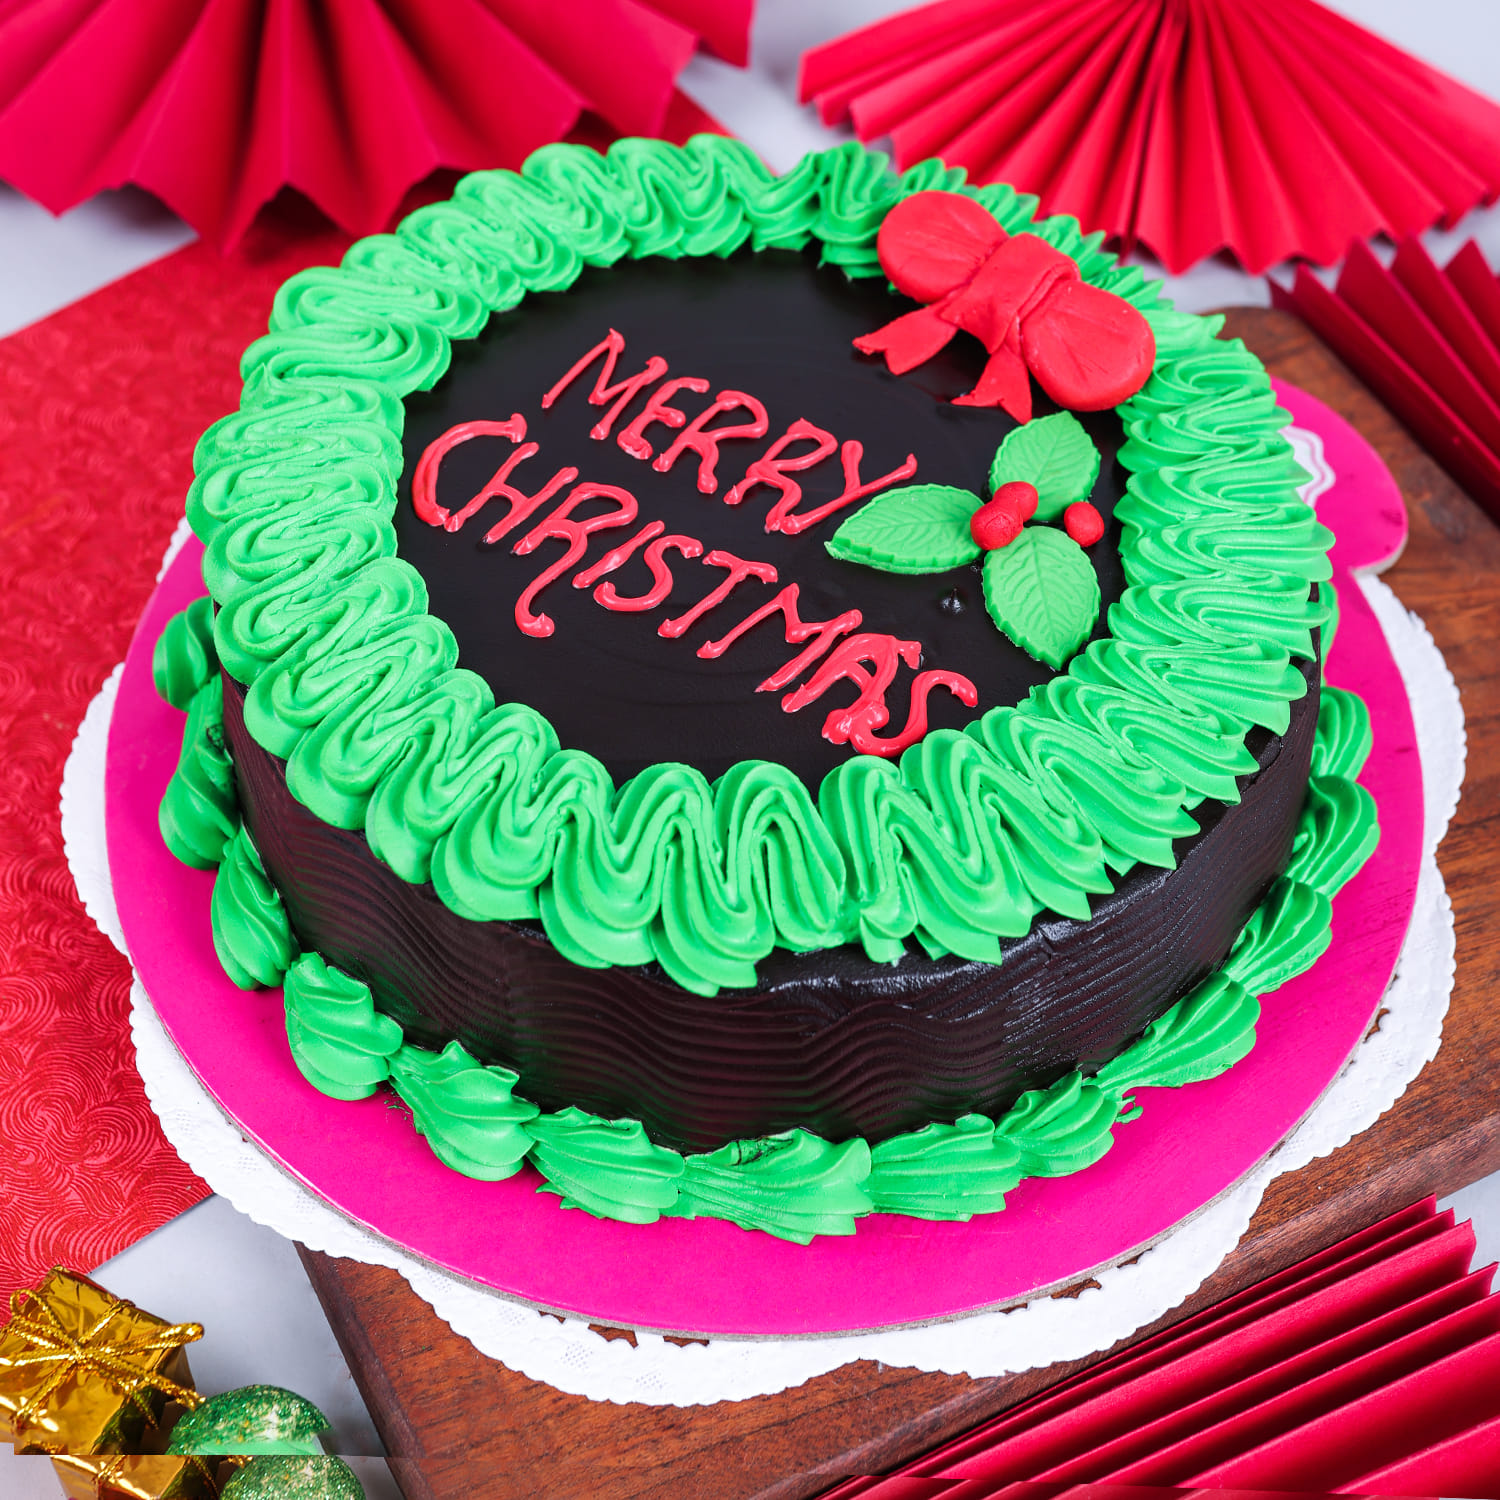 Floral Wreath Christmas Cake Half kg : Gift/Send Christmas Gifts Online  HD1150147 |IGP.com